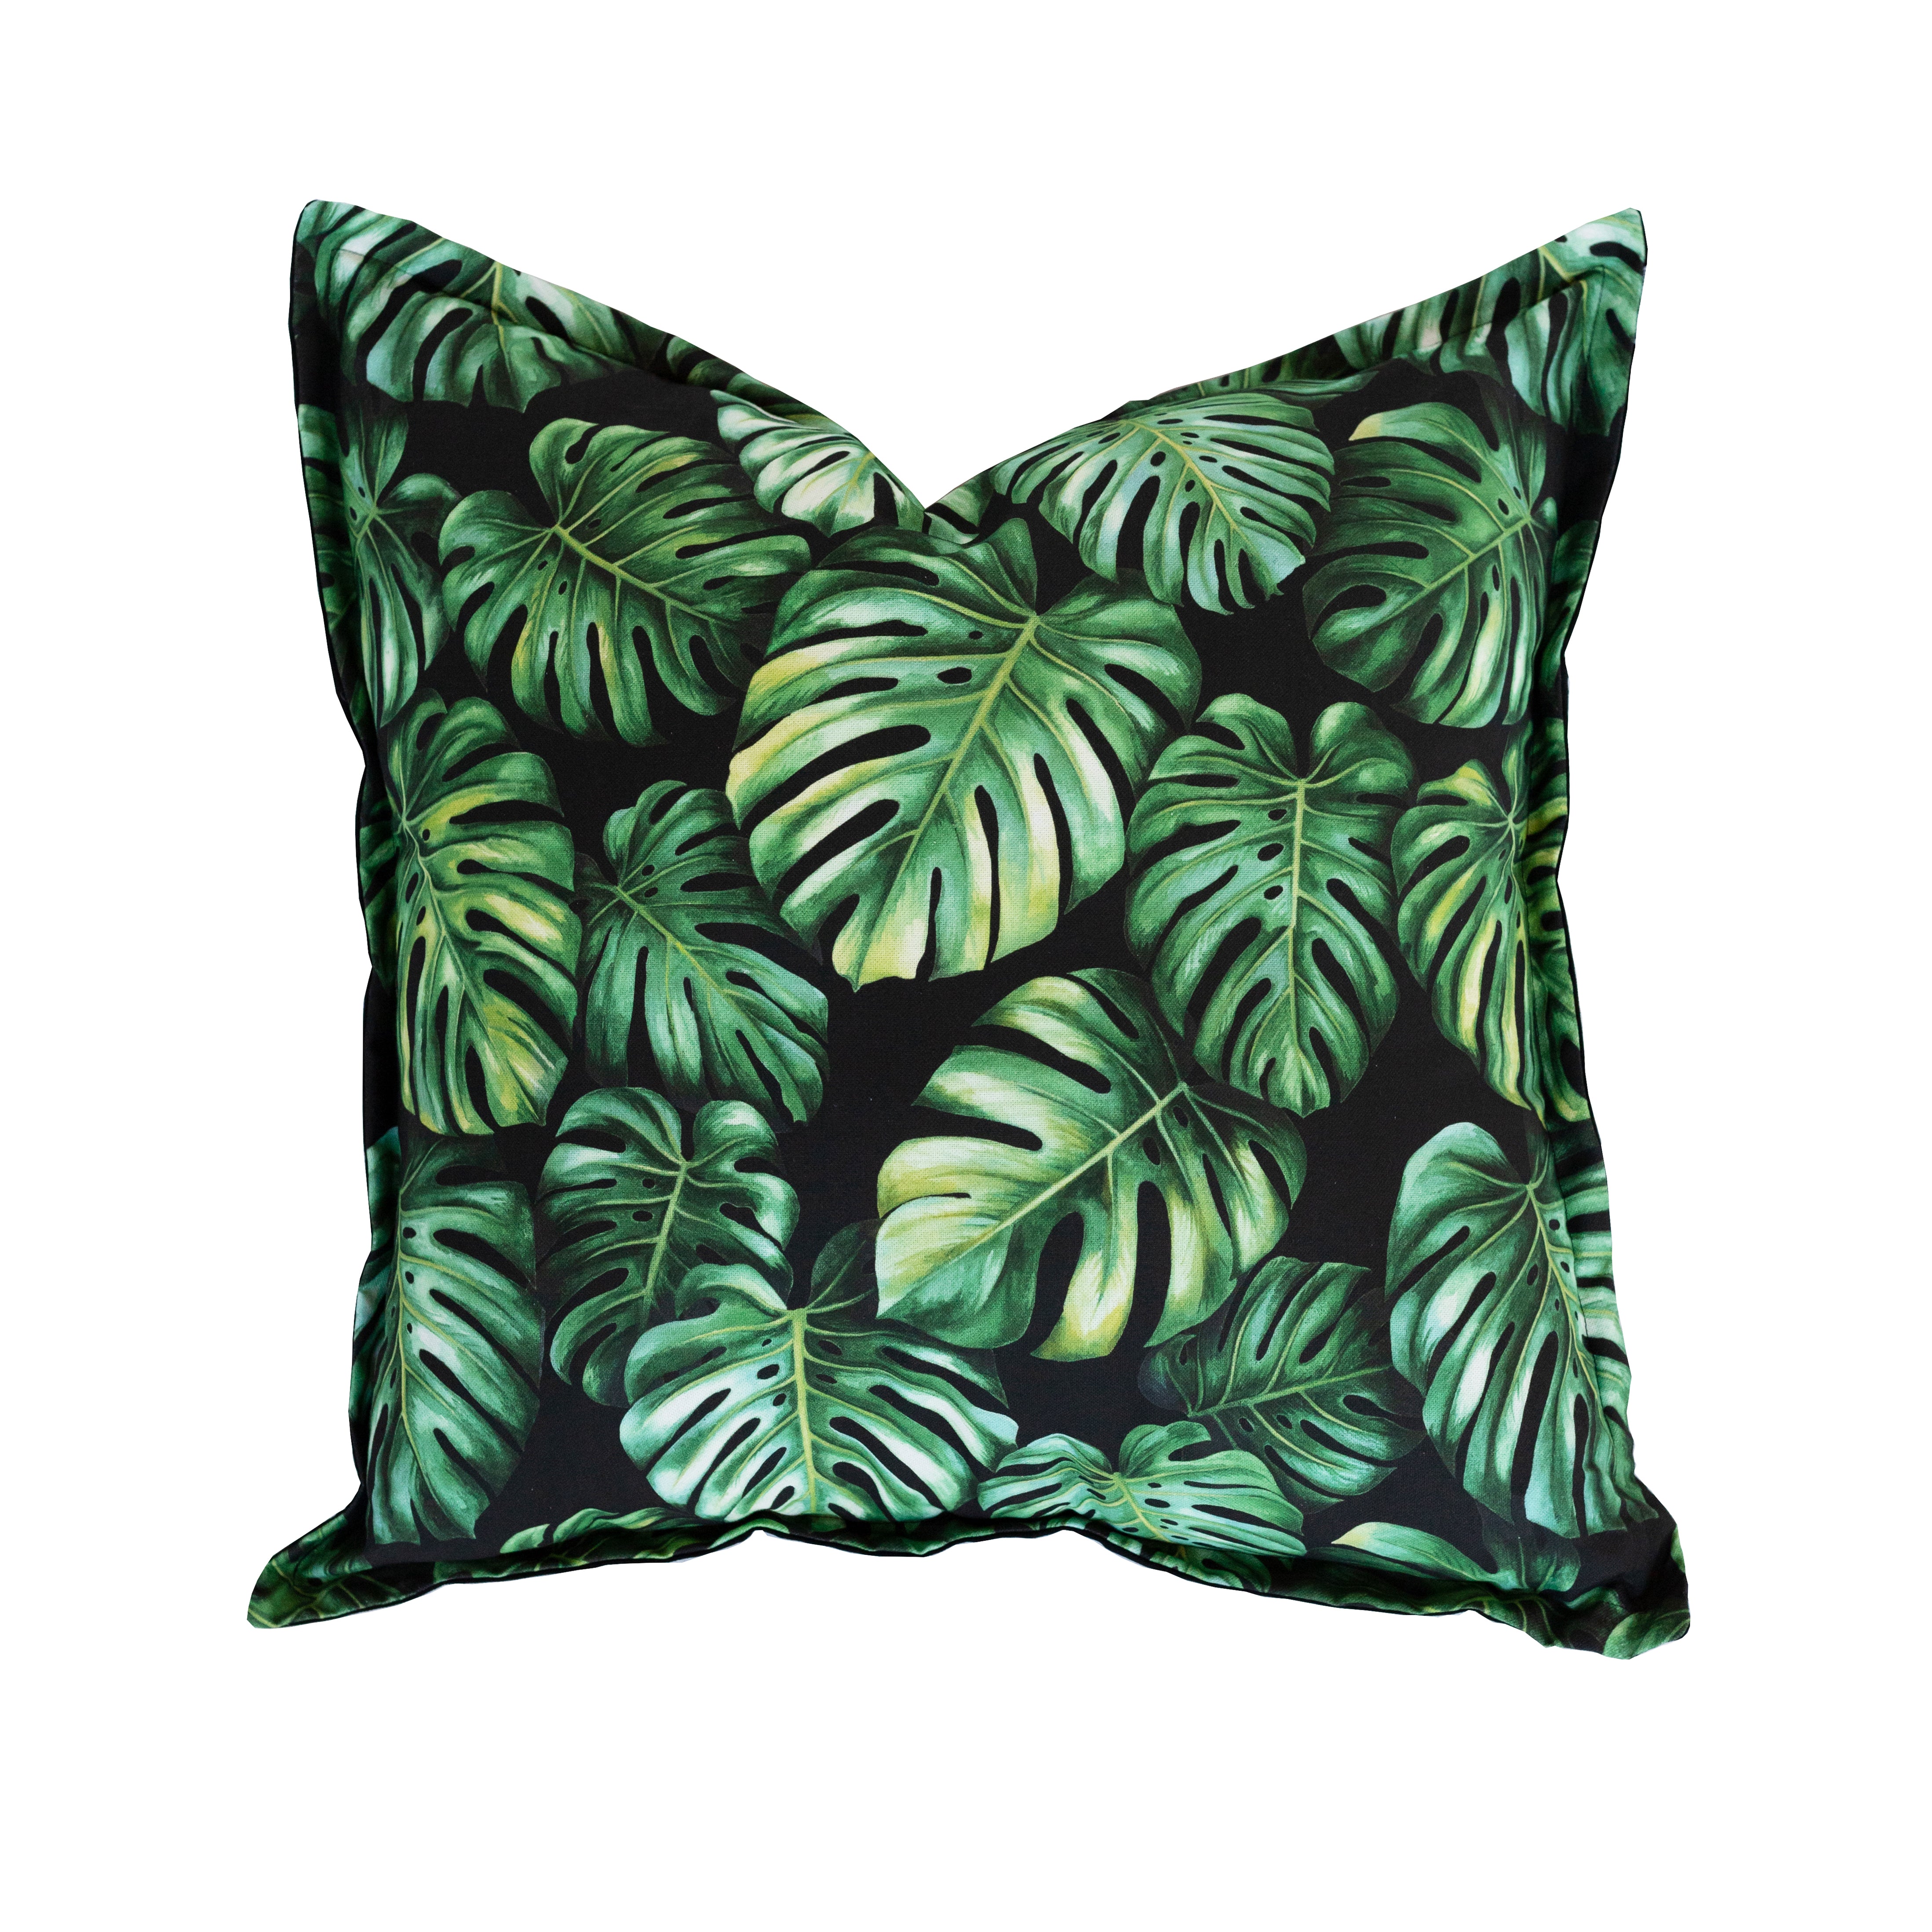 LITTLE MONSTER SCATTER CUSHION (600 x 600mm) - Locally Manufactured